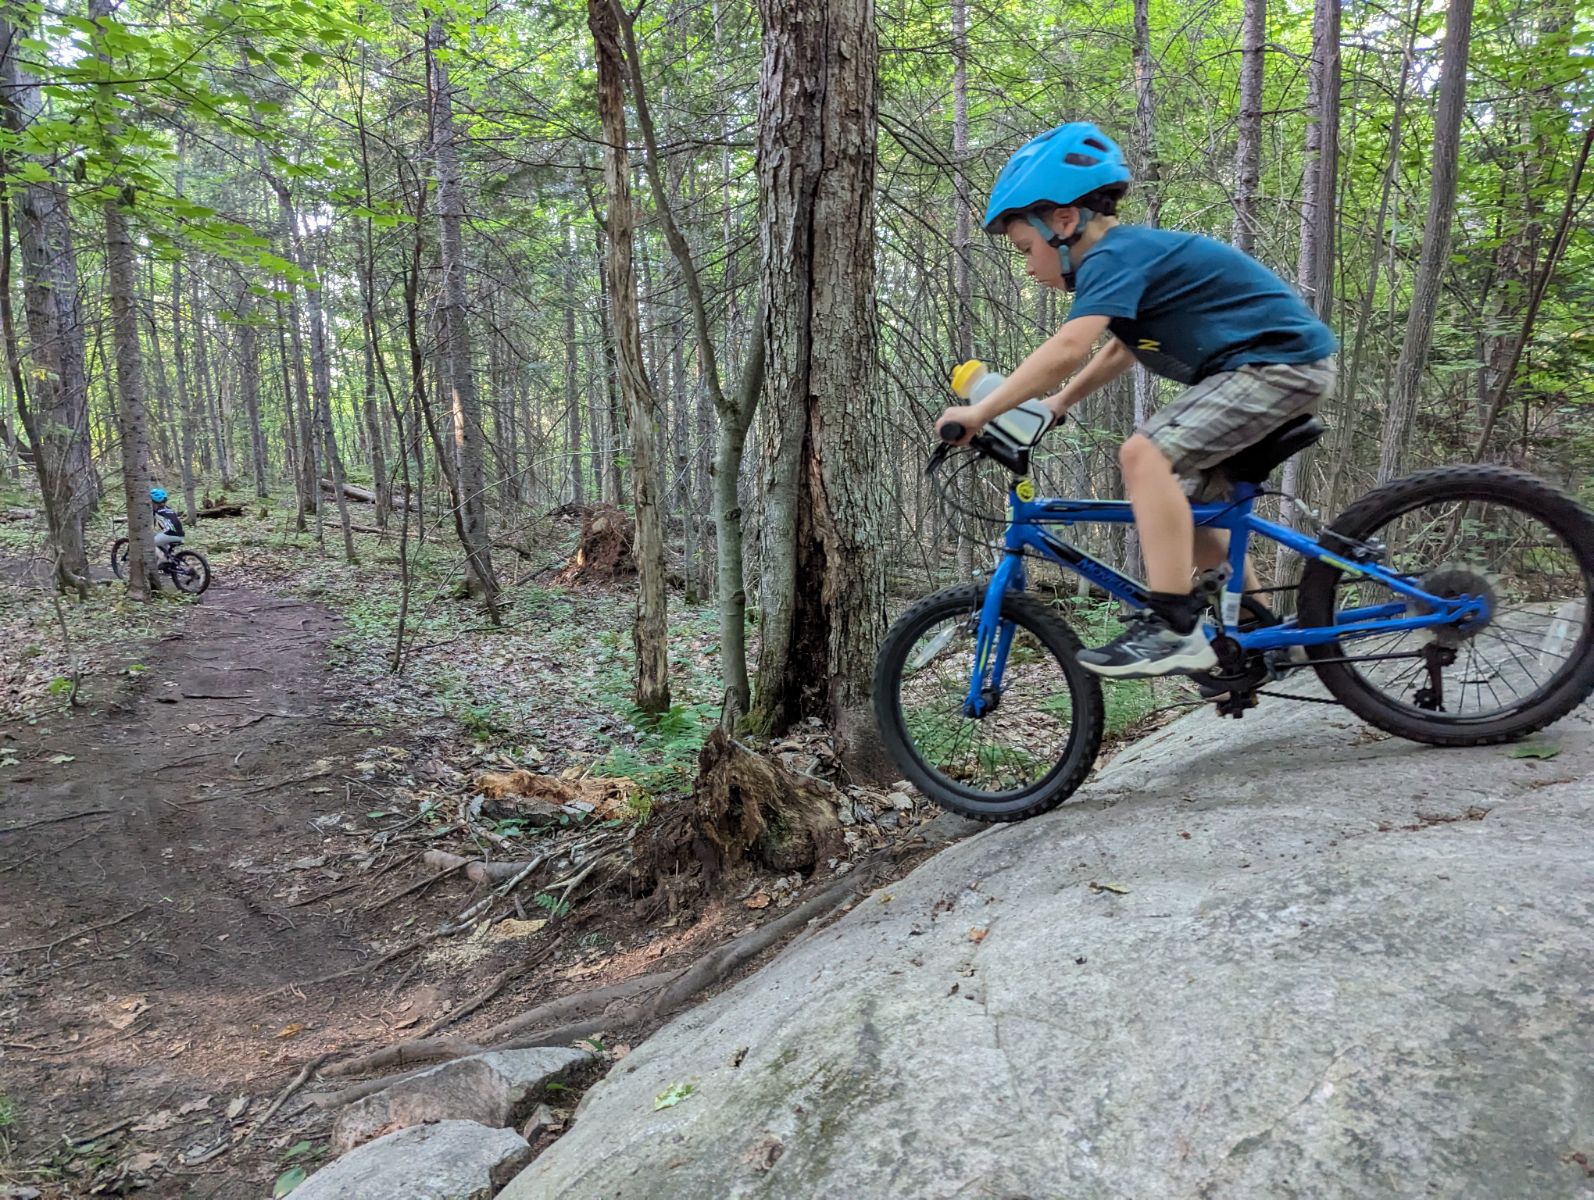 young child rides off a boulder along a forest mountain bike trail